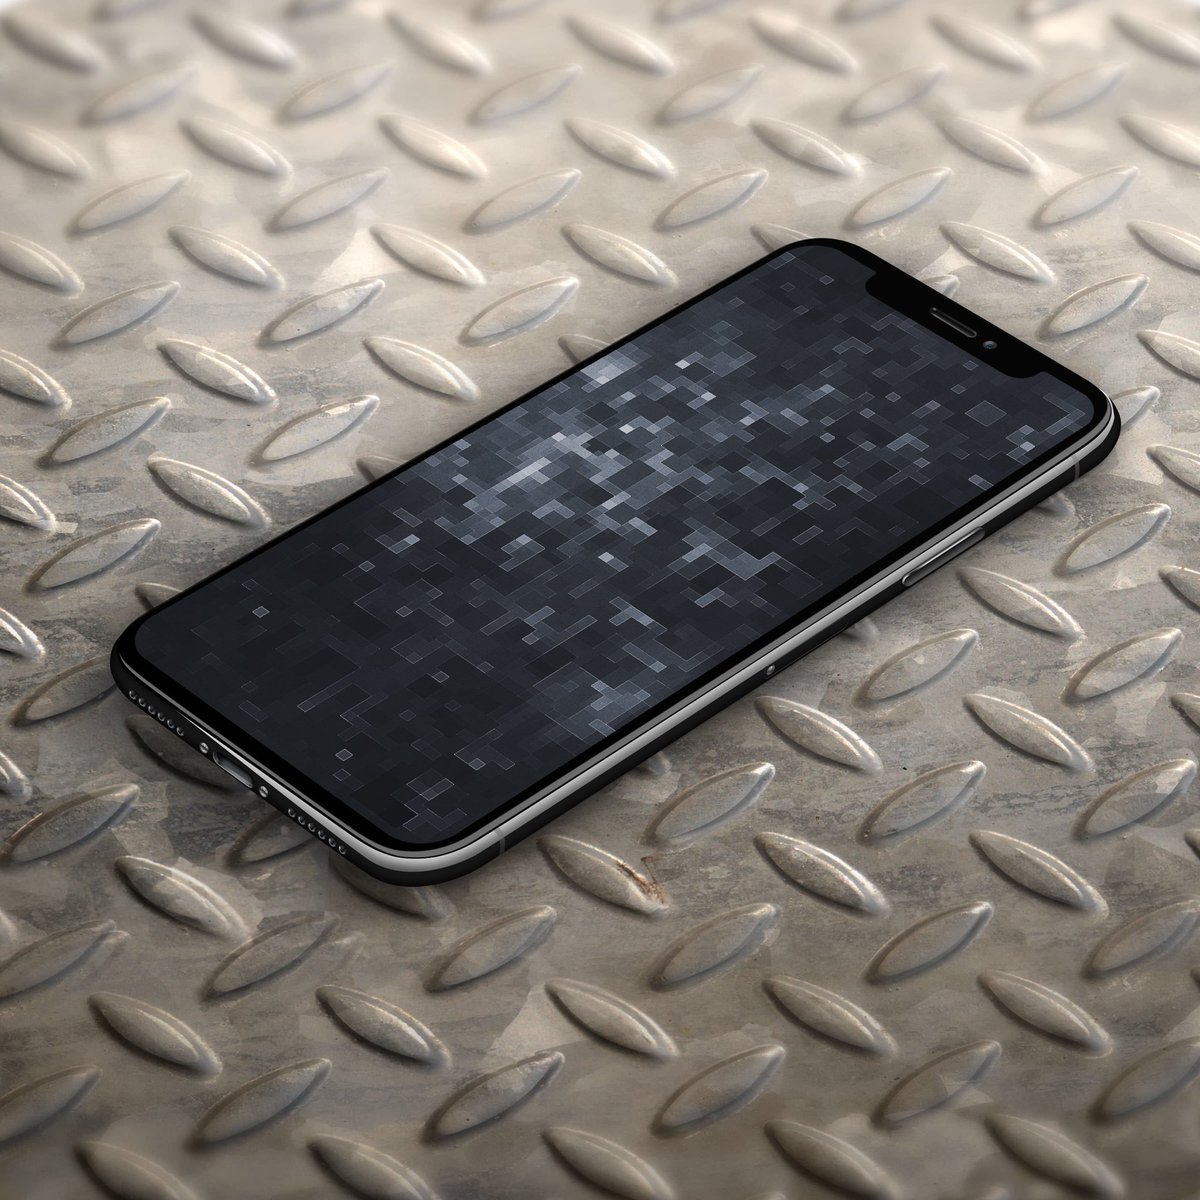 Ar7 On Twitter Wallpapers Ios Homescreen 3d Mosaic Black Wallpaper For Iphonex And All Iphone Devices Iphone X Https T Co 9ebfnt9we8 All Iphone Https T Co Ptmphzh0tu Prod By Ar72014 Https T Co N2u1lgb44b